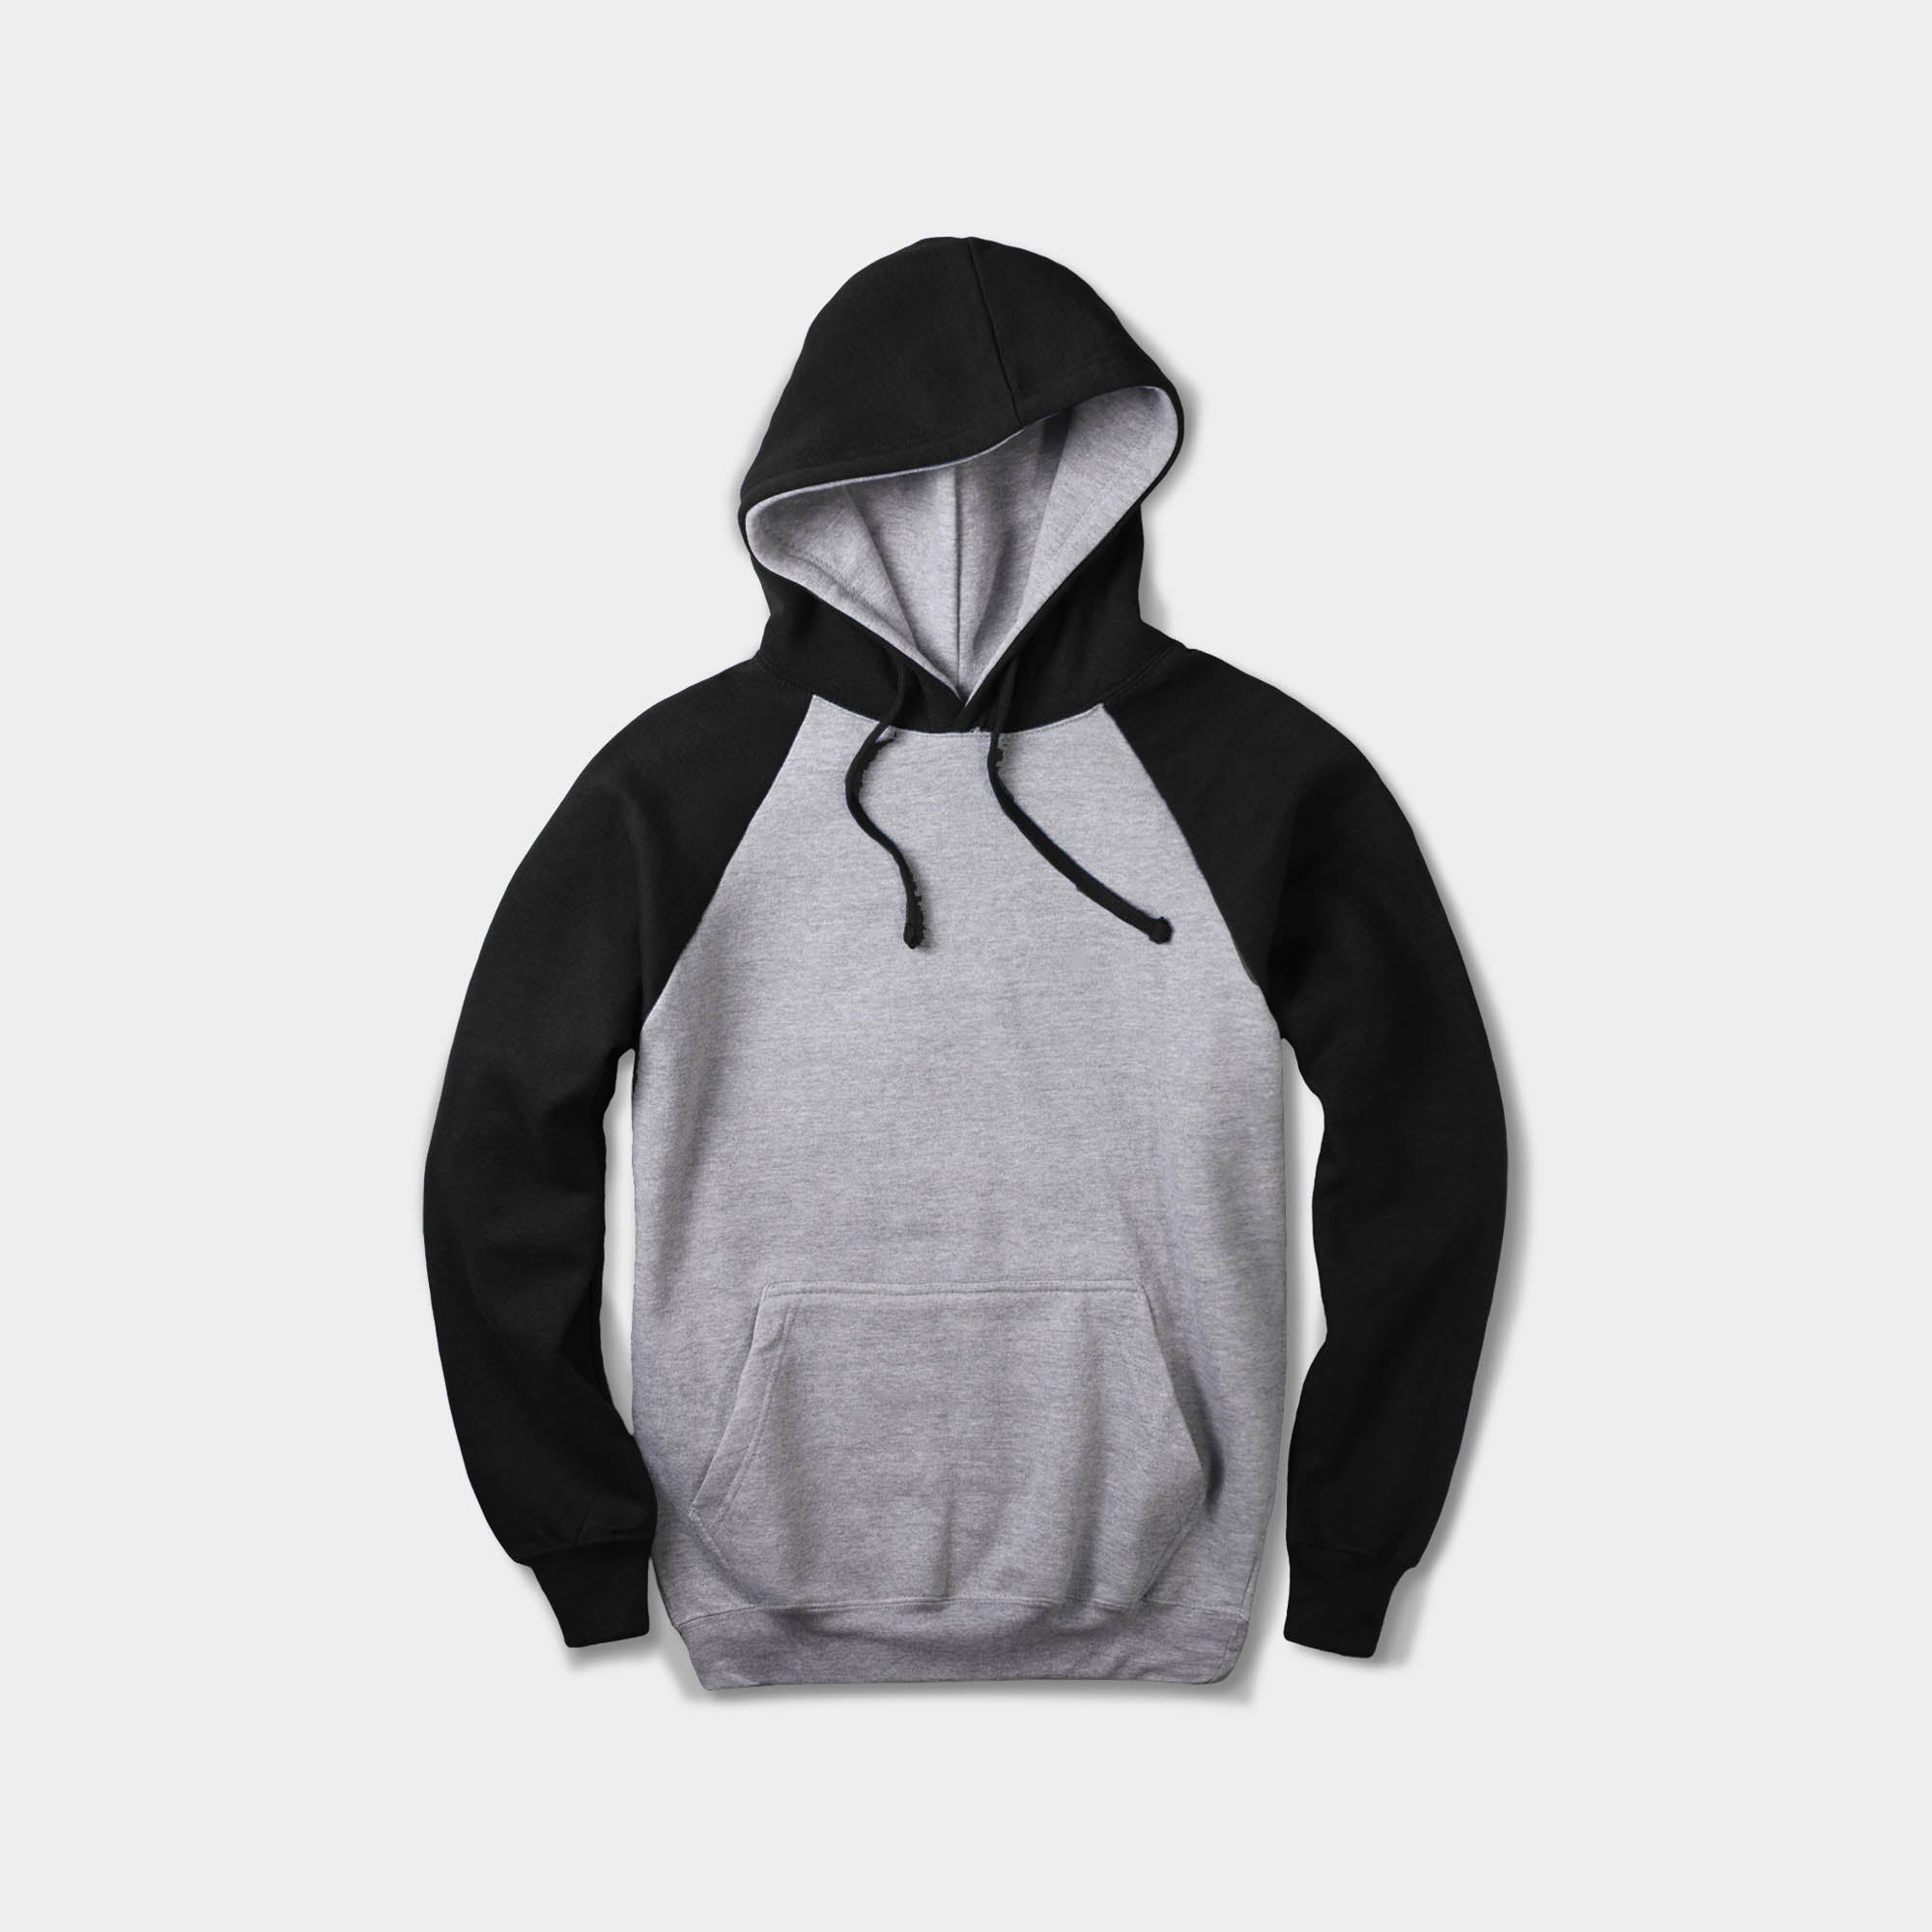 pullover hoodie_mens pullover hoodie_pullover sweatshirt_champion pullover hoodie_pullover adidas_hooded pullover_Heather Gray/Black